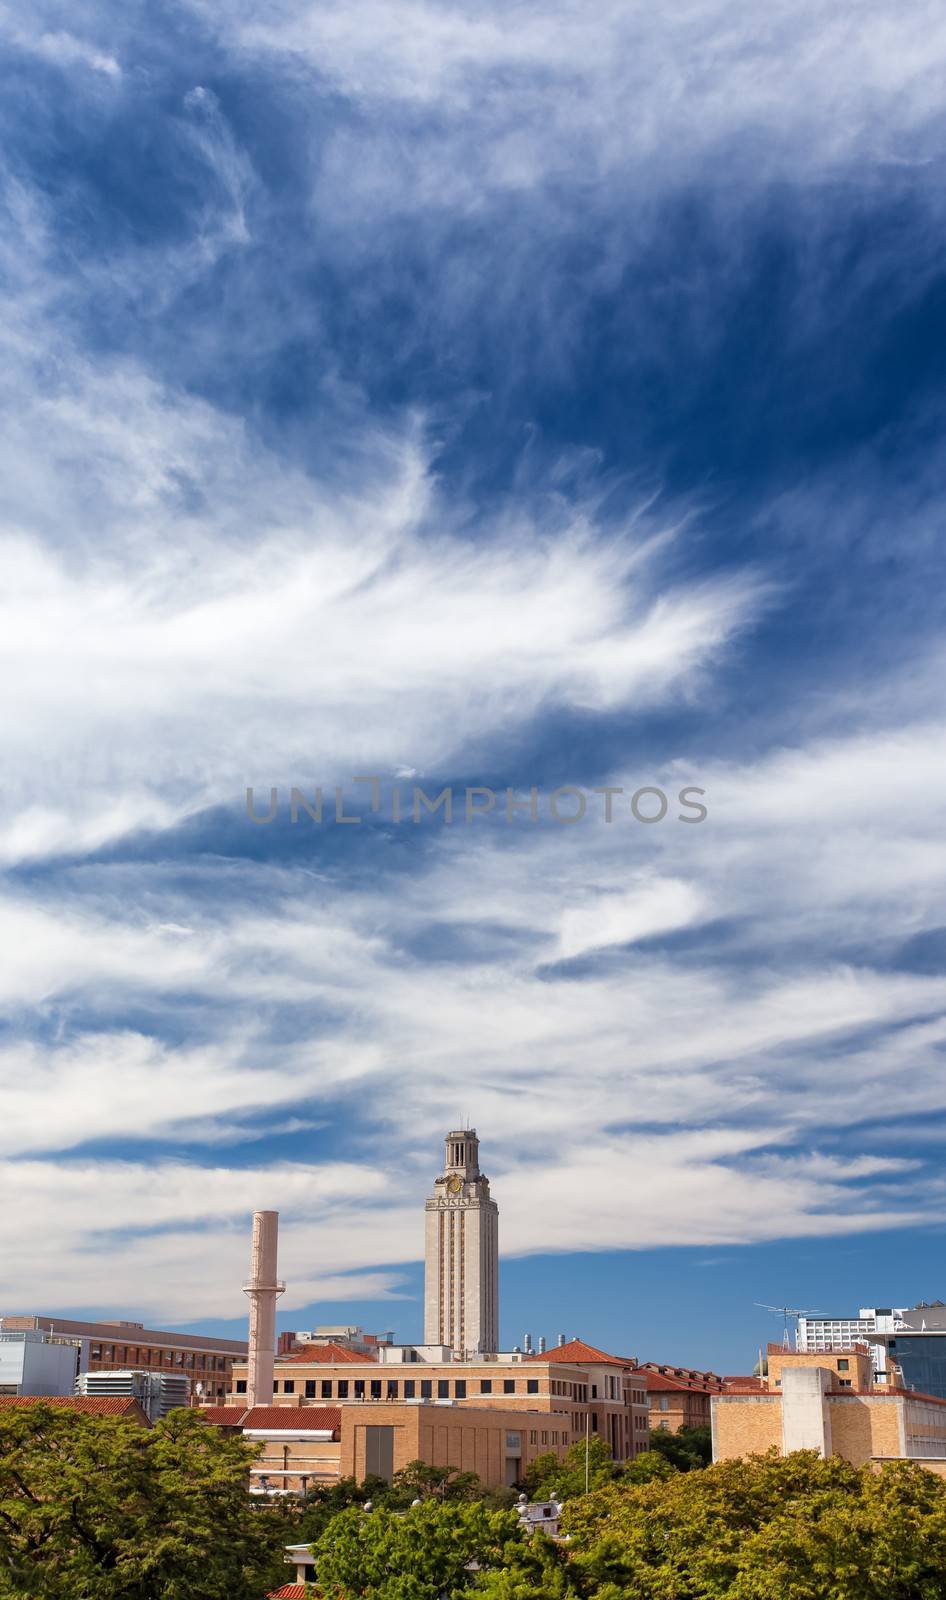 AUSTIN,TX/USA - NOVEMBER 14:  Vertical panoramic View of  the campus of the University of Texas, a state research university and the flagship institution of the The University of Texas System. November 14, 2013.